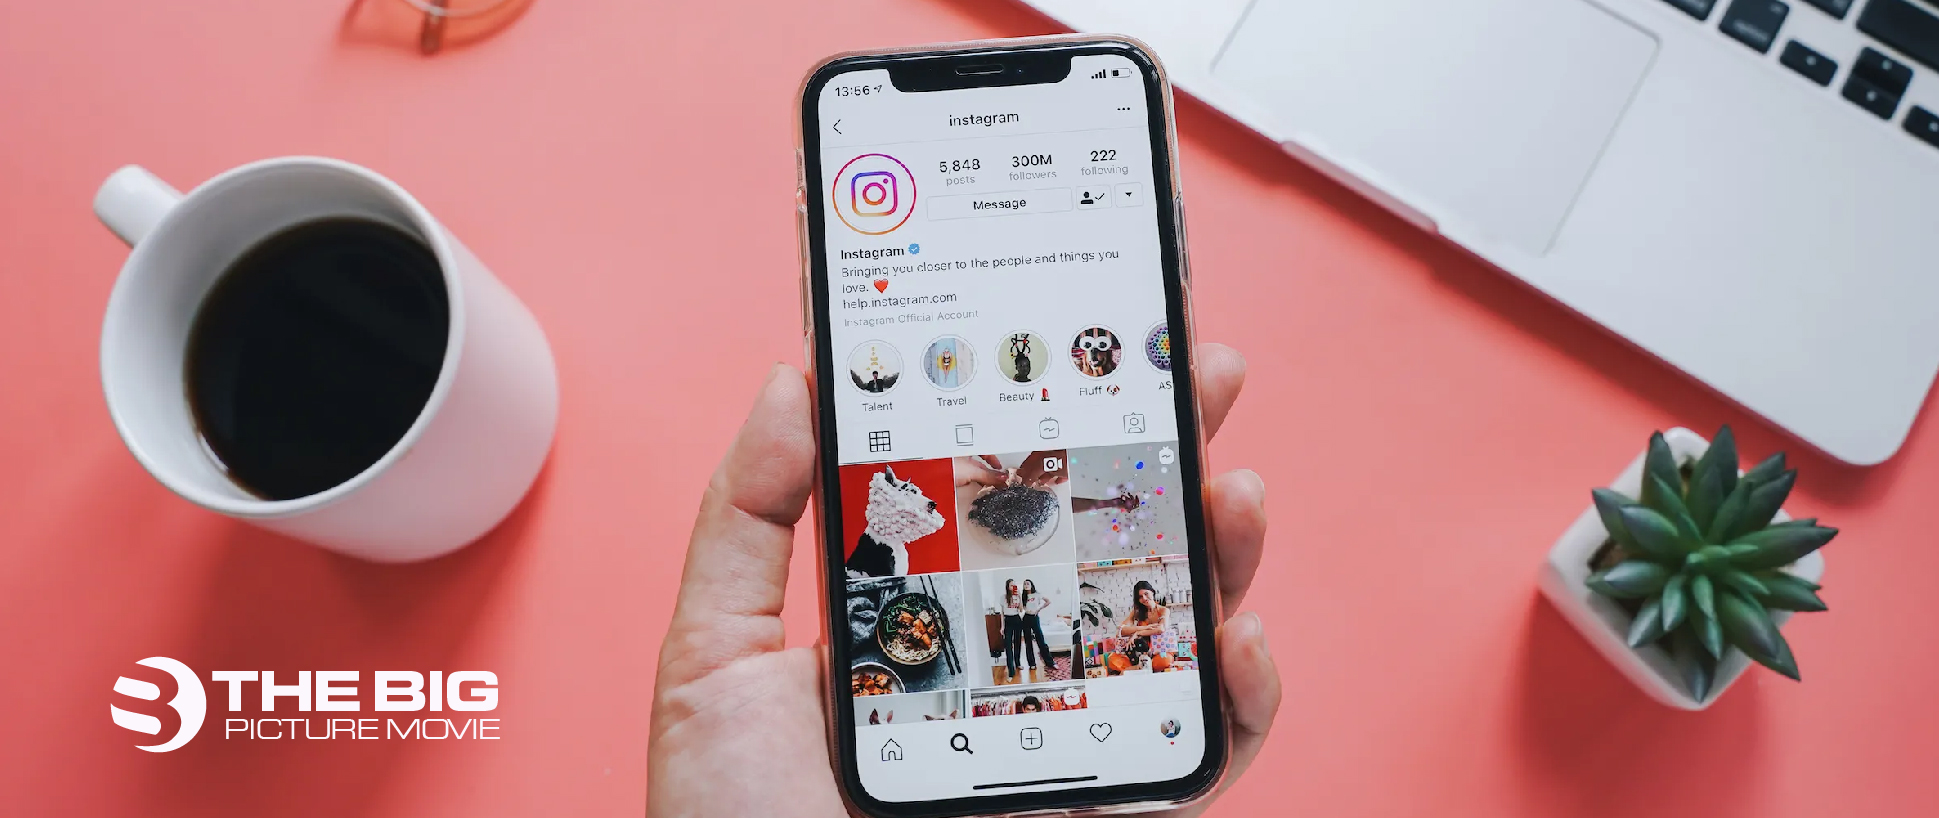 How to Temporarily Disable Instagram Account on iPhone